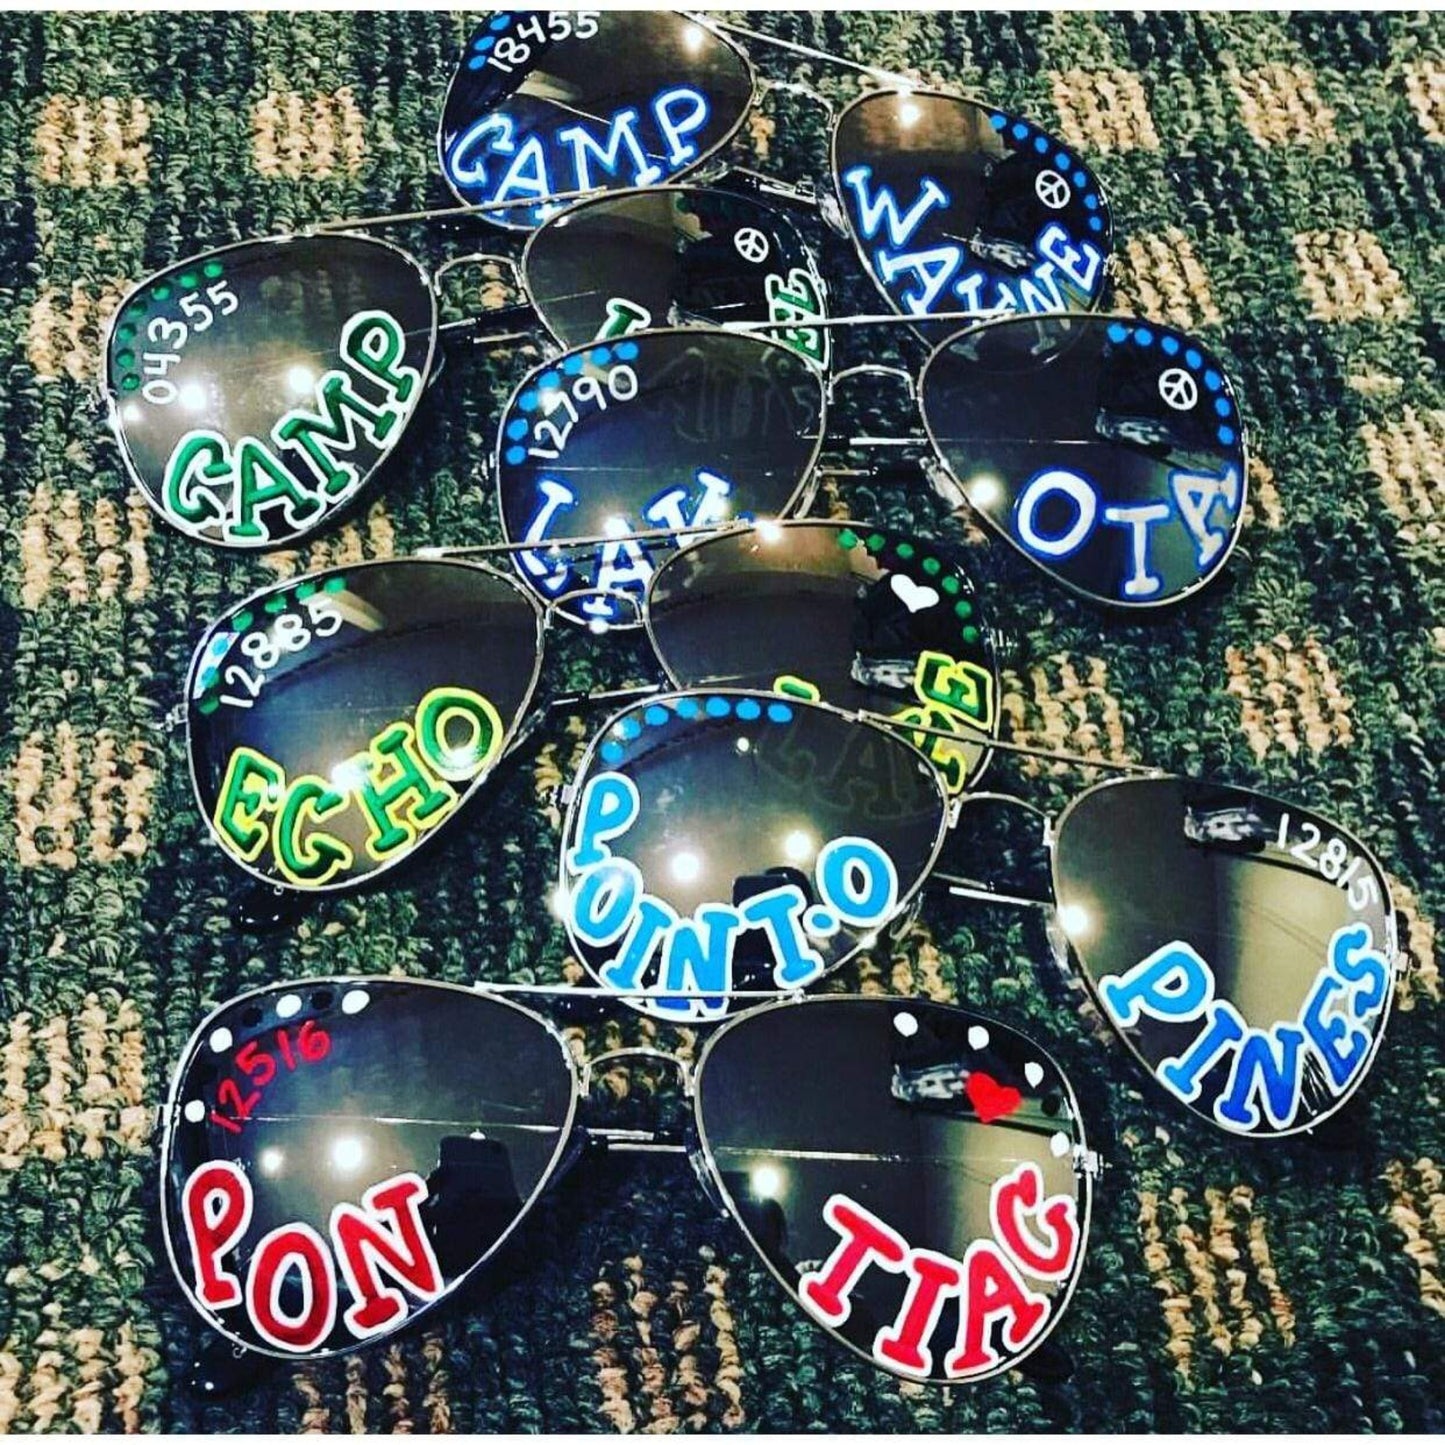 Personalized Camp Name and Zip Aviators